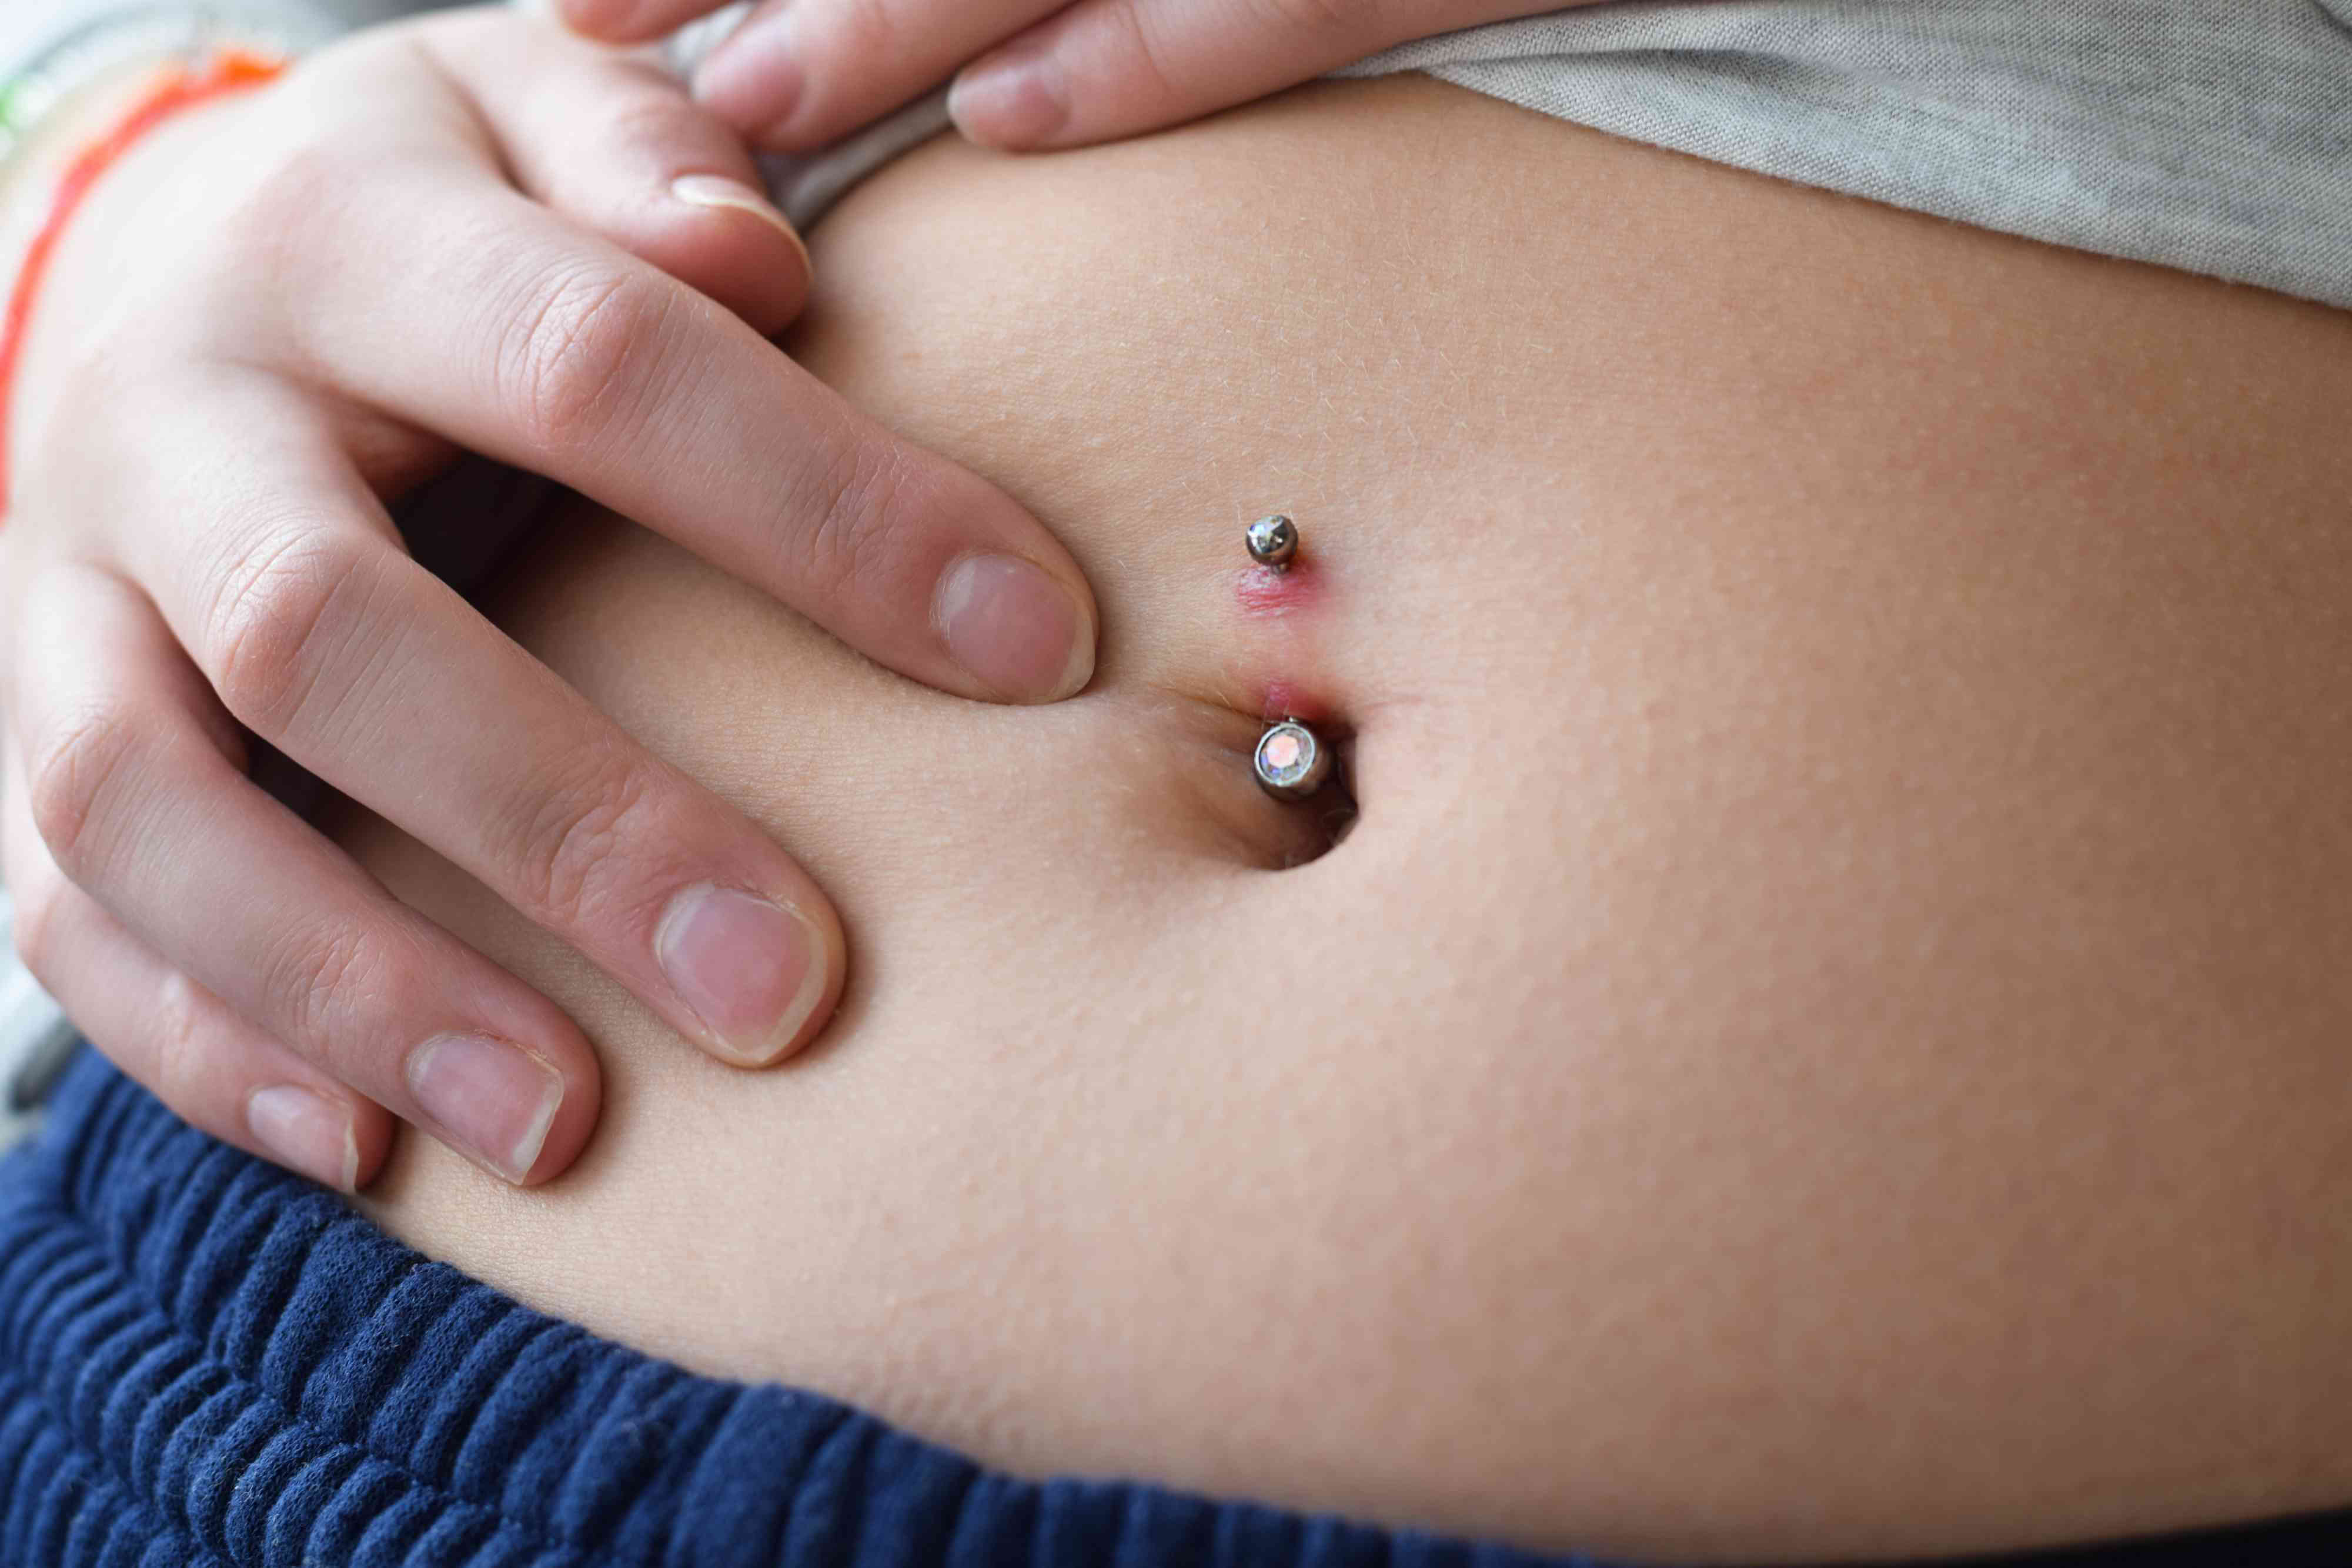 What To Do For An Infected Belly Button Piercing